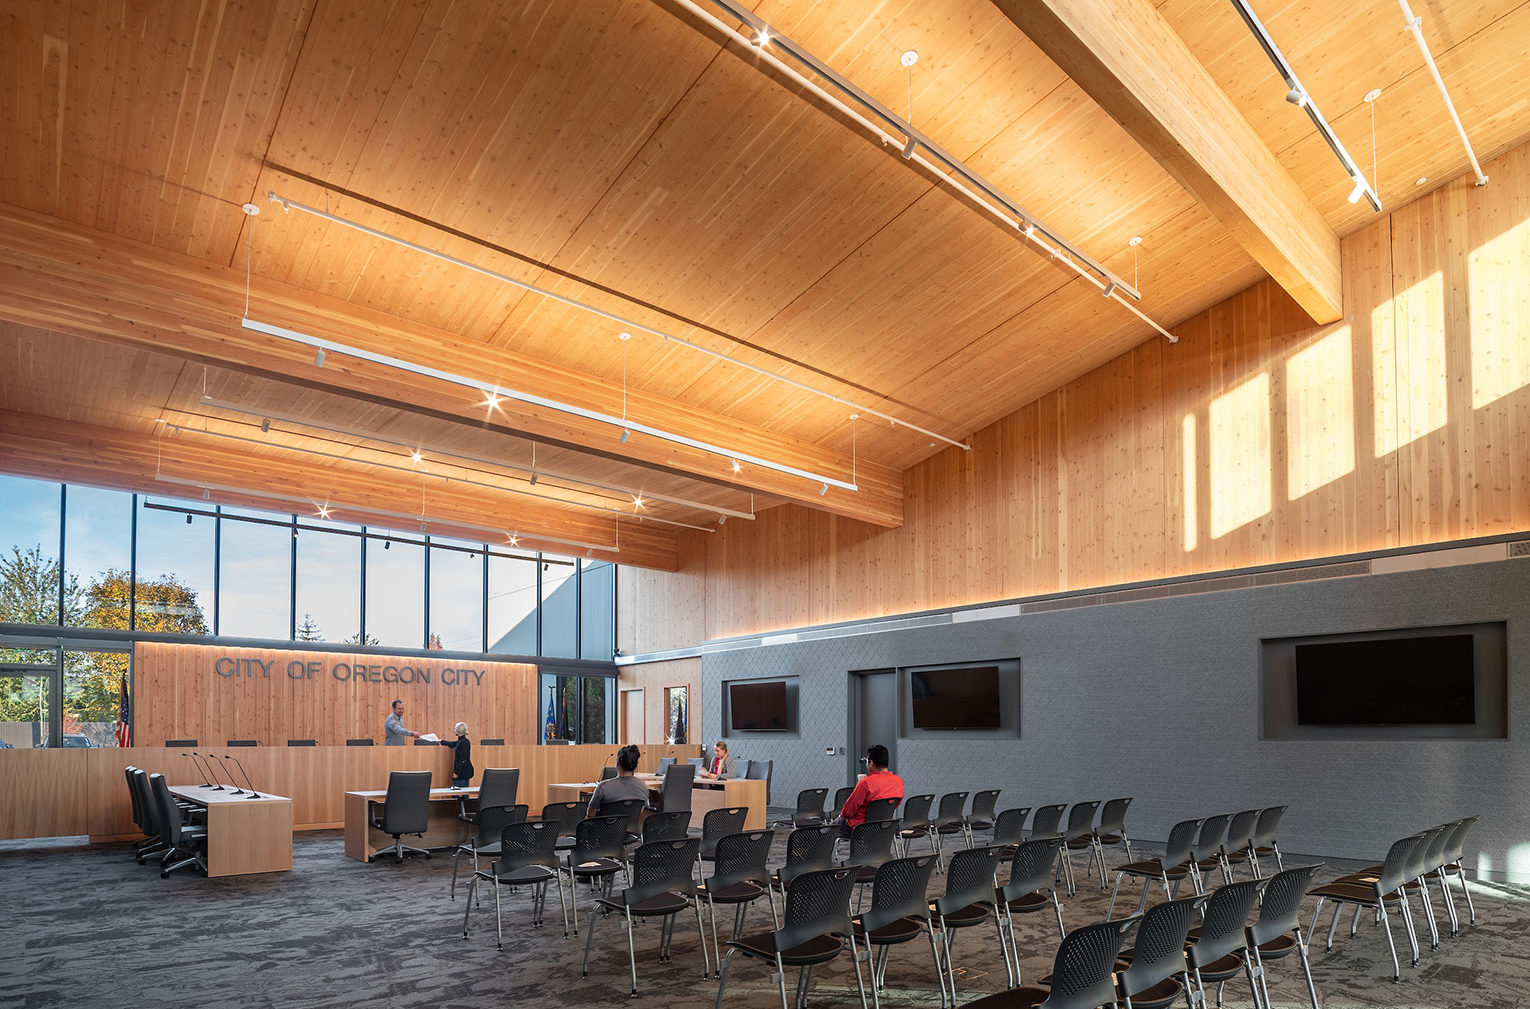 Robert Libke Public Safety and Municipal Courts Building. A large council chamber with a dias int he background and seating in in the foreground. The high ceiling is made of mass timber and sunlight streams through windows behind the dias, bathing the room in natural light.